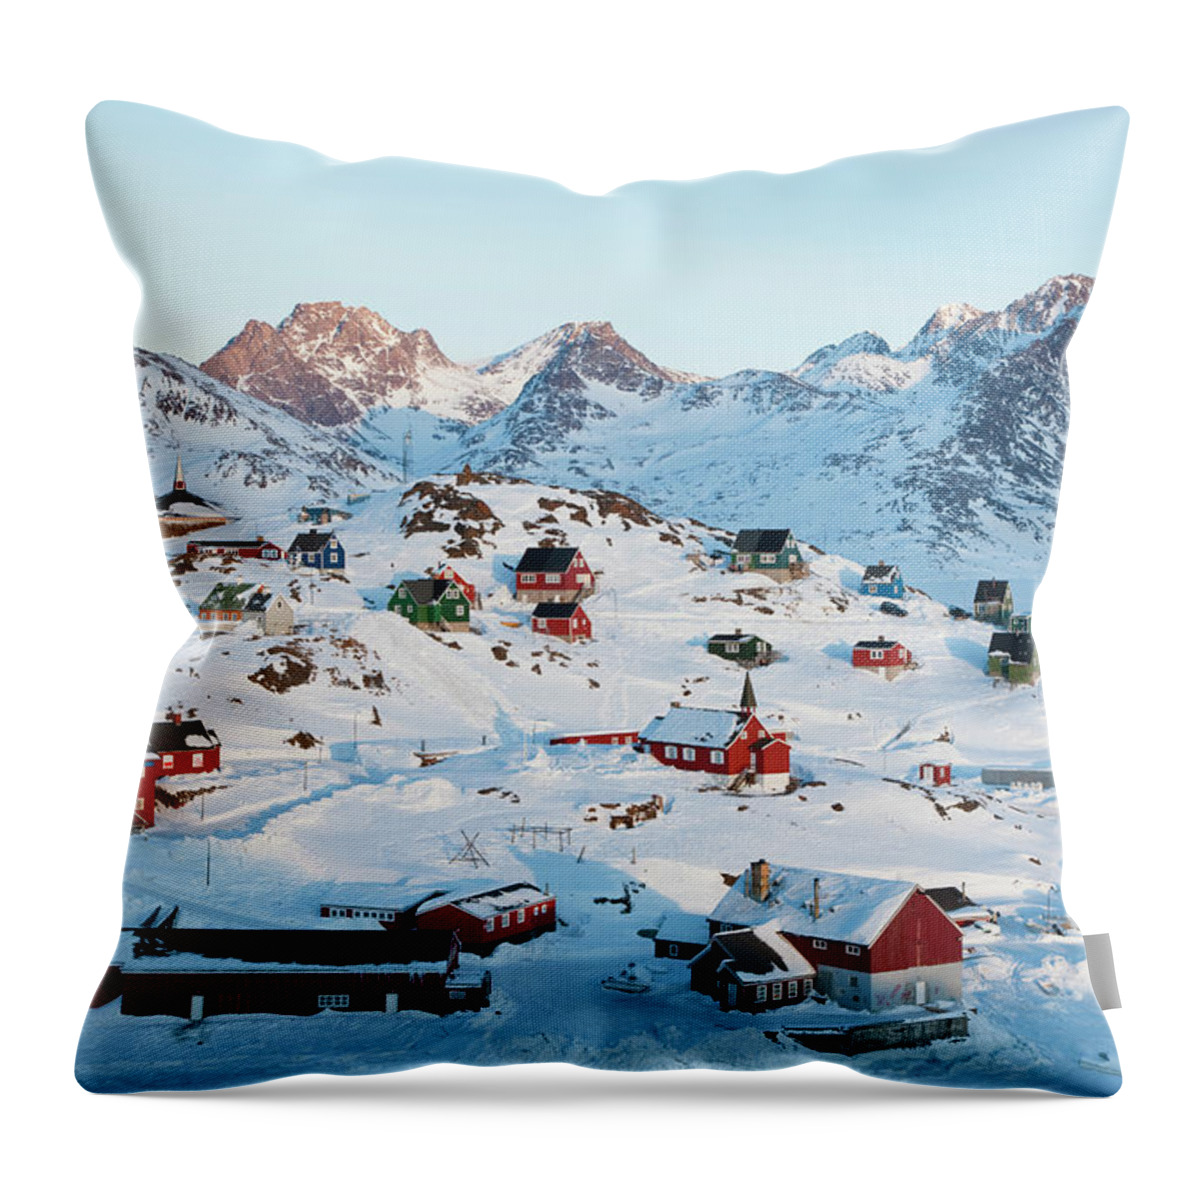 Tranquility Throw Pillow featuring the photograph Tasiilaq, Greenland In Winter by Peter Adams